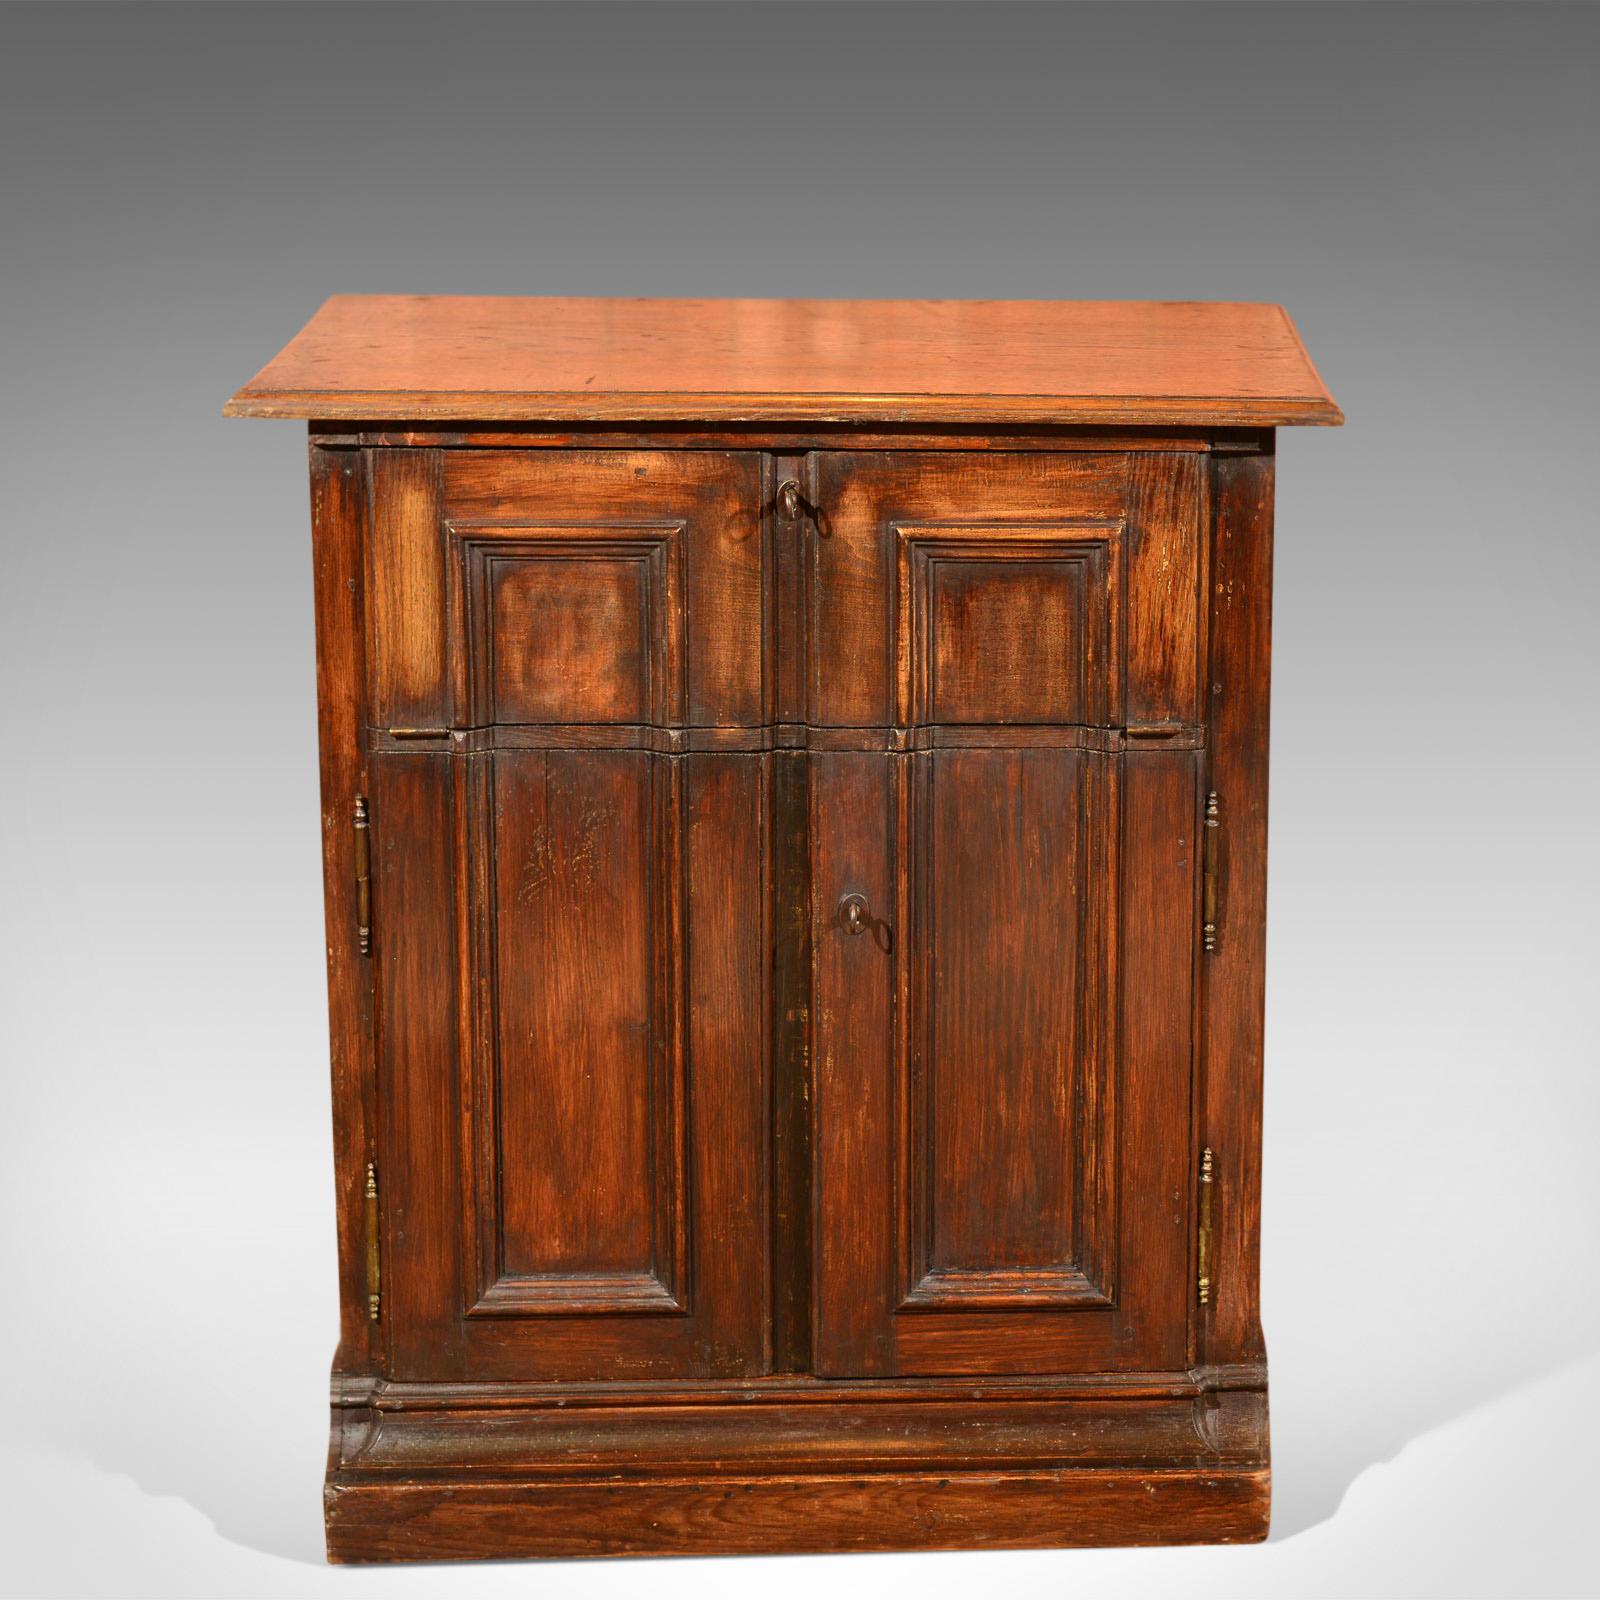 This is an antique specimen cabinet, a French, oak cupboard offering a secretaire desk dating to the late 19th century, circa 1850.

In a desirable French country style
Complete with original working locks and keys
Crafted in oak with grain